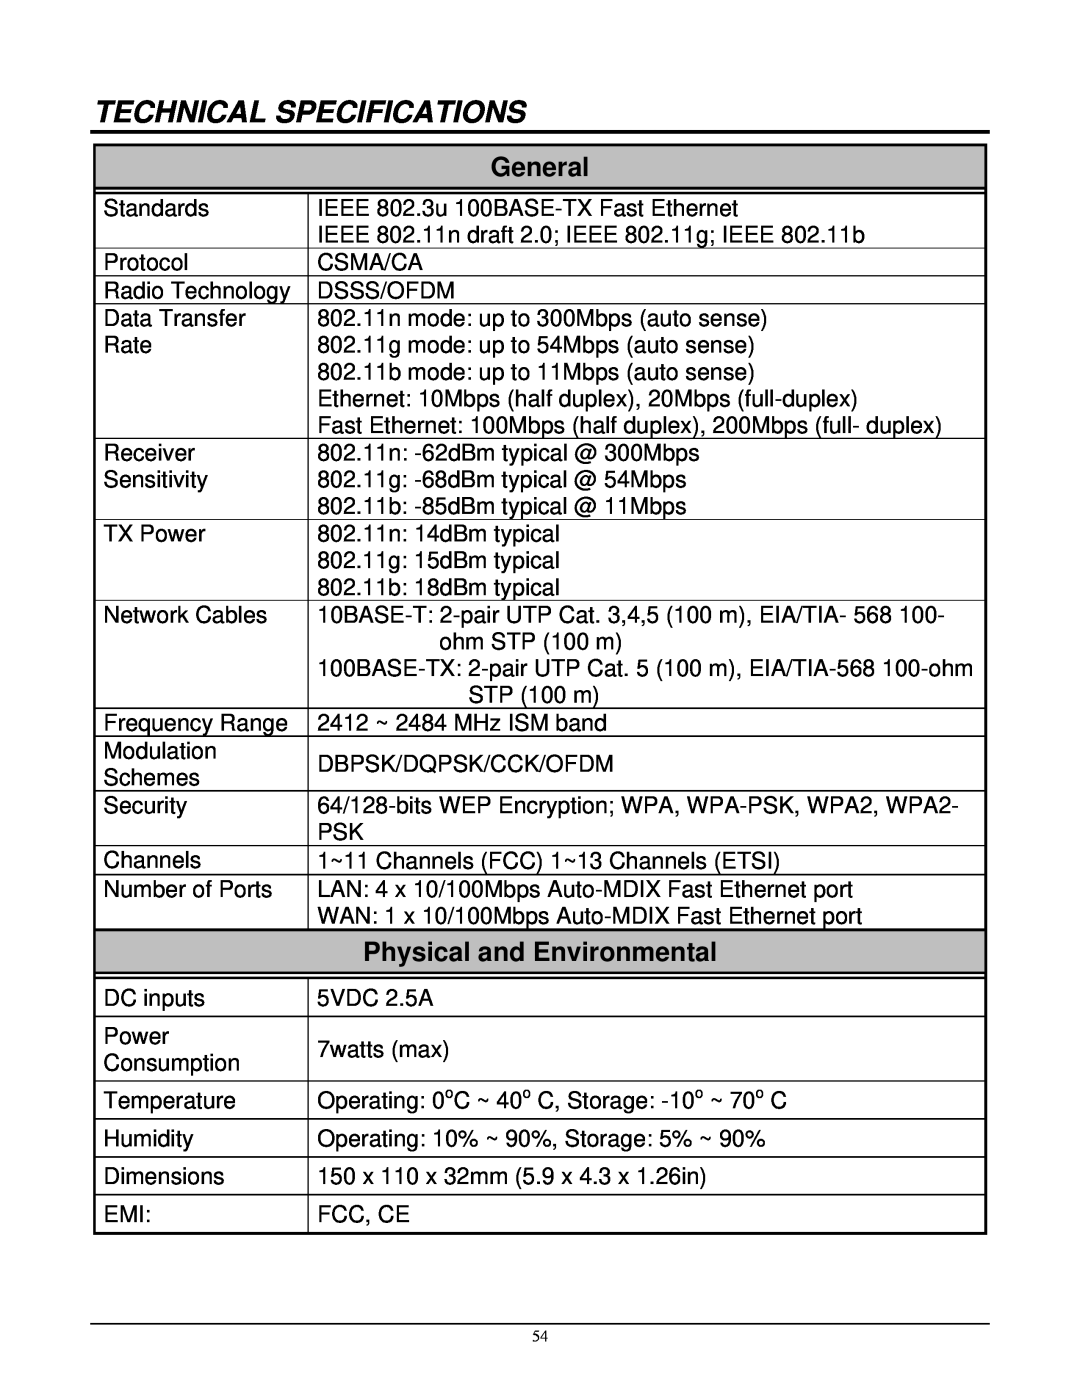 TRENDnet TEW-652BRP manual Technical Specifications, General, Physical and Environmental 